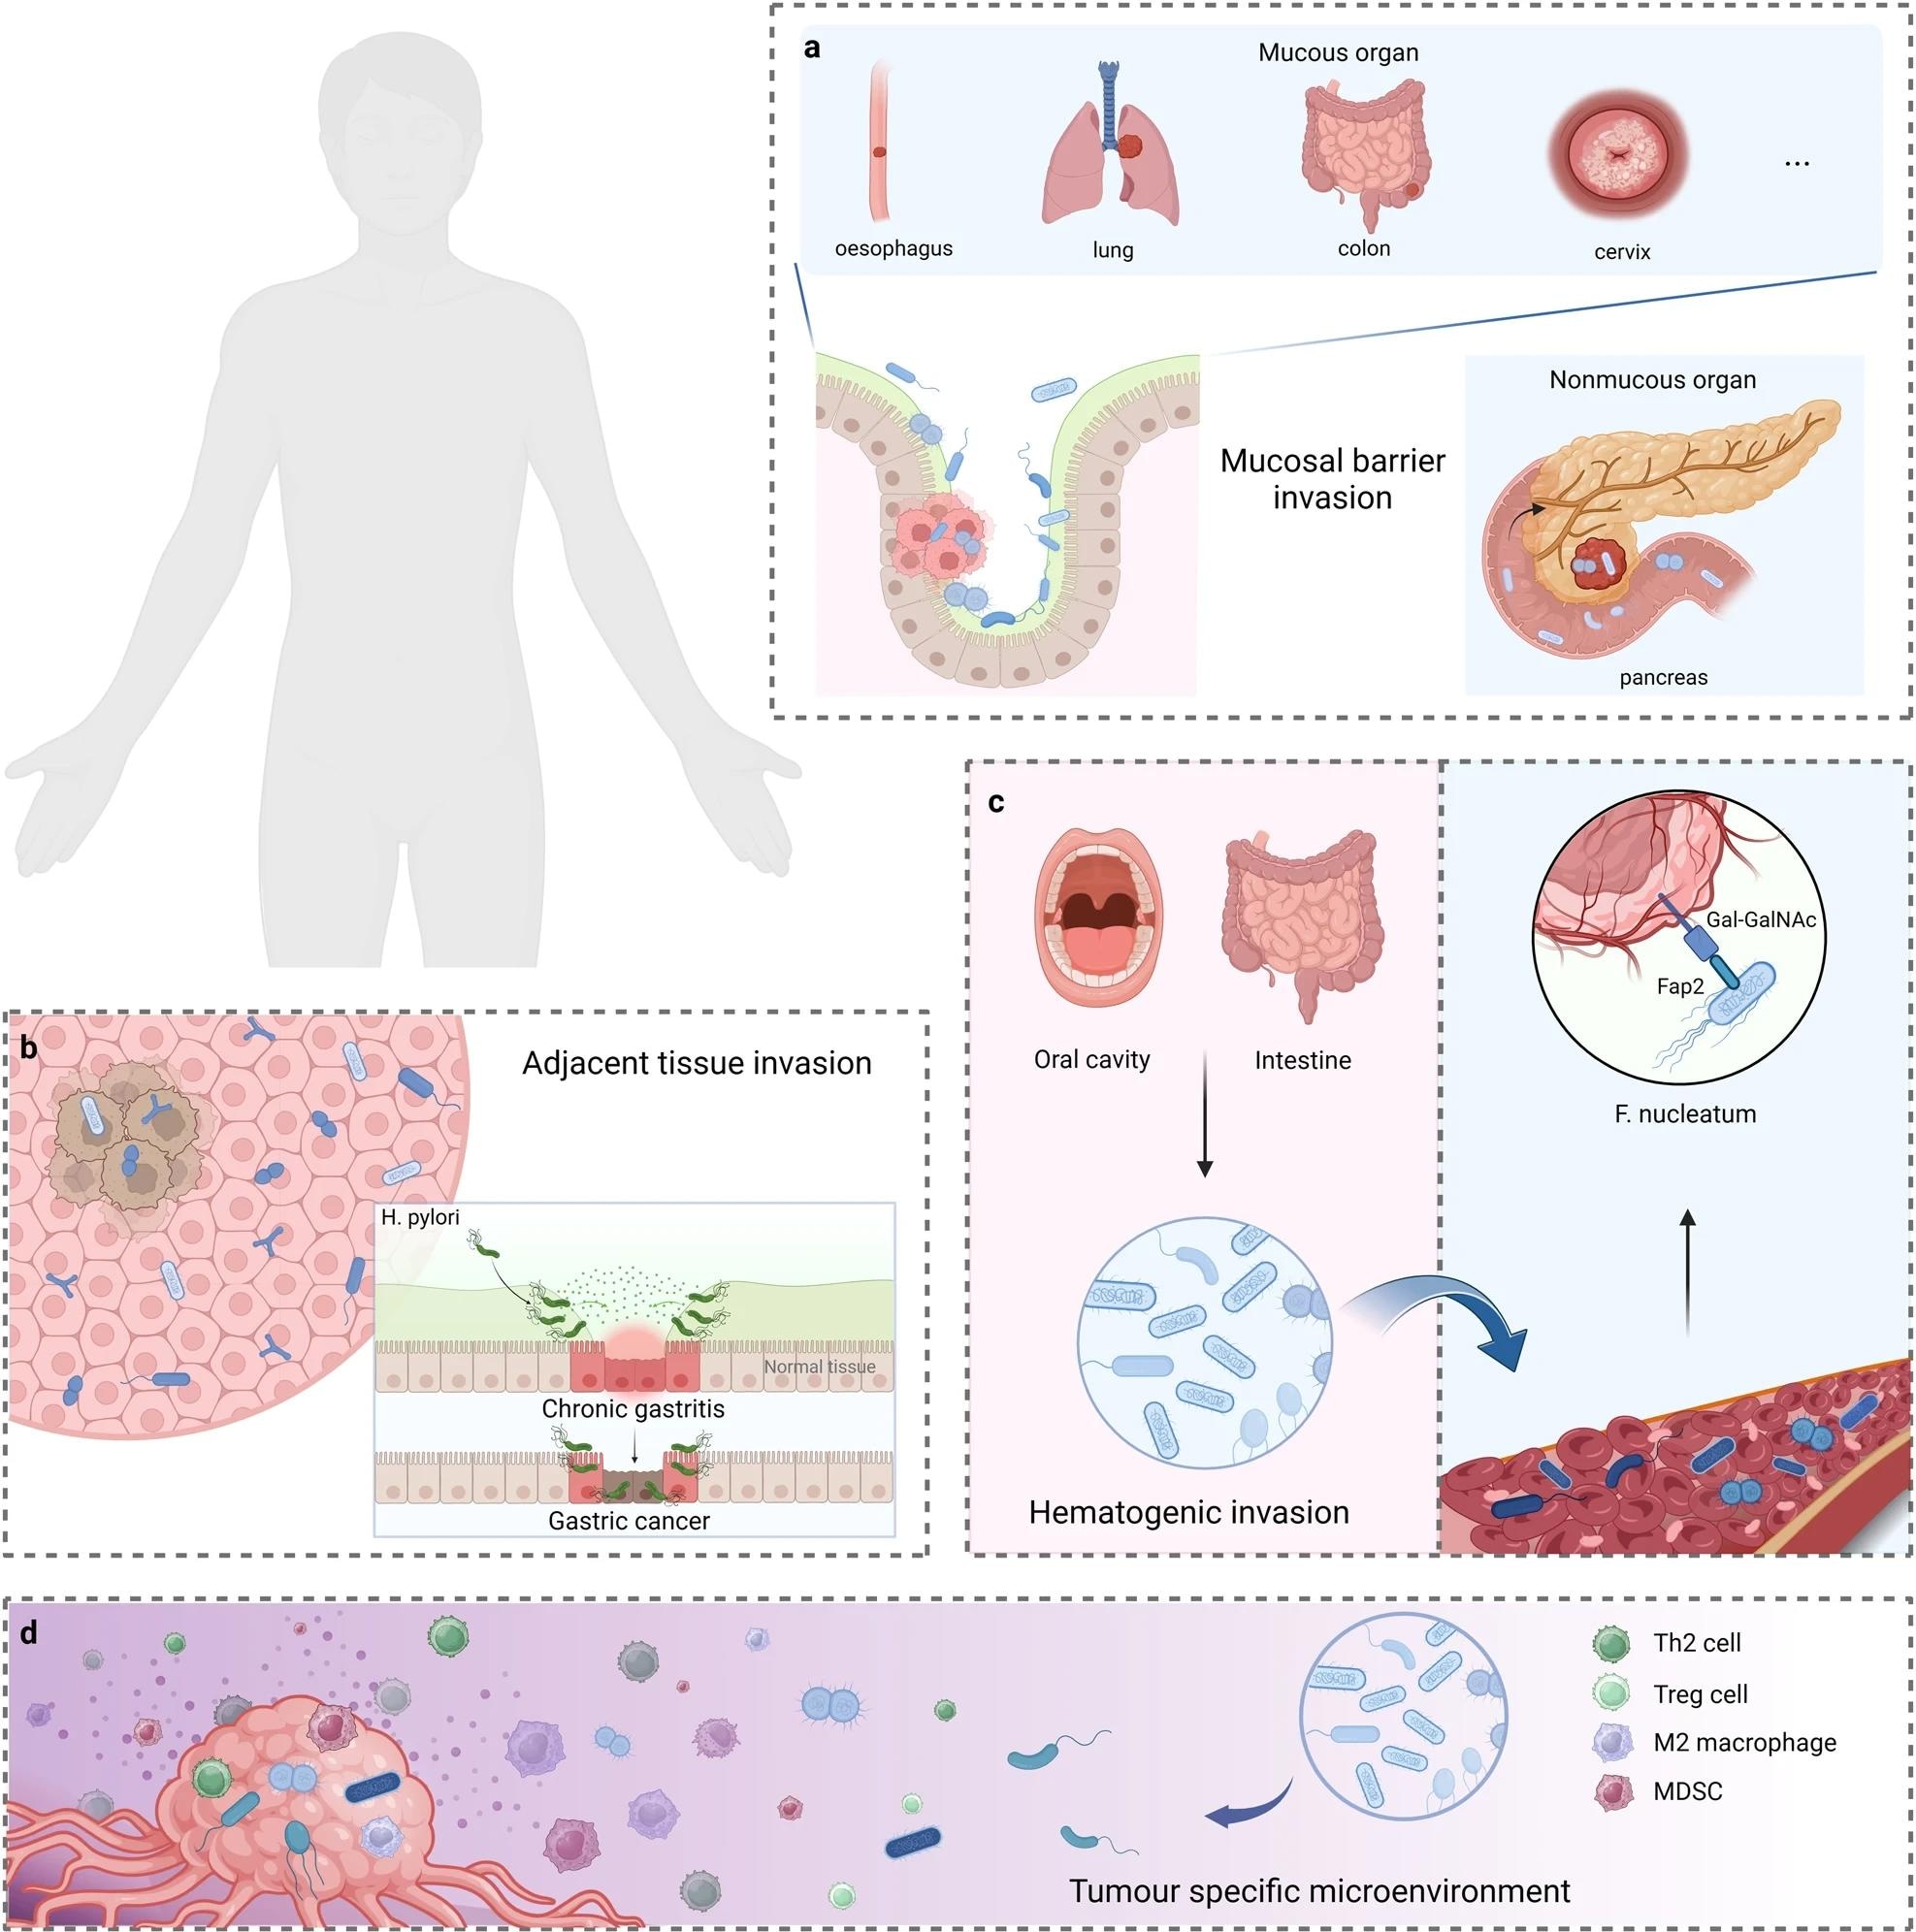 The potential origins of intratumoural microbiota. a Mucosal barrier invasion. Microorganisms may invade the tumor through the damaged mucosa. b Adjacent tissue invasion. the microbiome community between the tumor and adjacent normal tissue shares many similarities. c Hematogenic invasion. microorganisms from the oral cavity, intestine, and other potential locations may be carried to the tumor locations and colonize the tumor through destroyed blood vessels. d Attraction of tumor-specific microenvironment. immunosuppressive, hypoxic, and metabolic nutrient-enriched environments in tumors may enhance microbial colonization. Created with BioRender.com